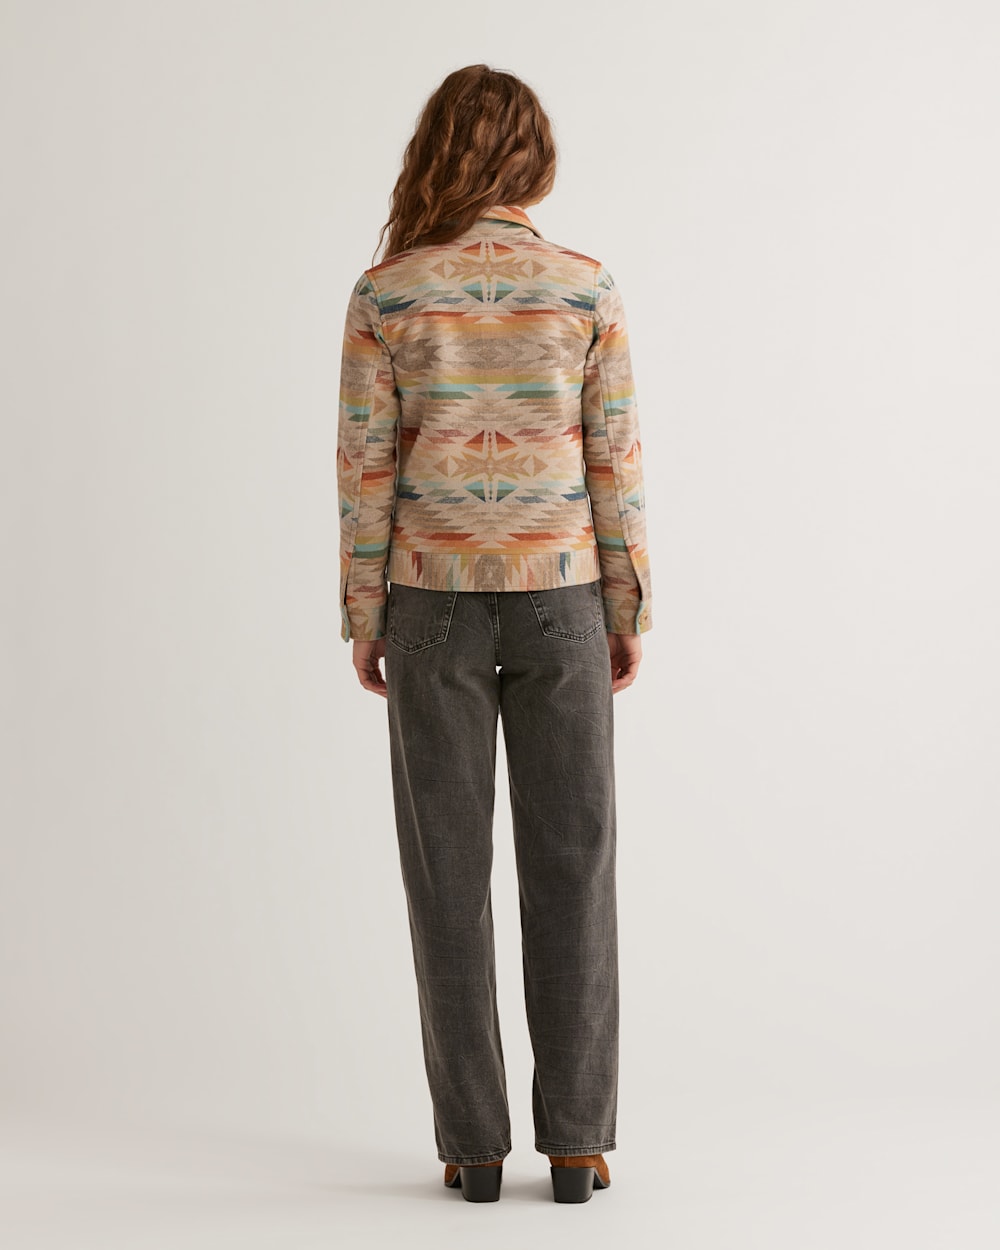 ALTERNATE VIEW OF WOMEN'S WOOL WILLA JACKET IN TAN MIX SUMMERLAND image number 3